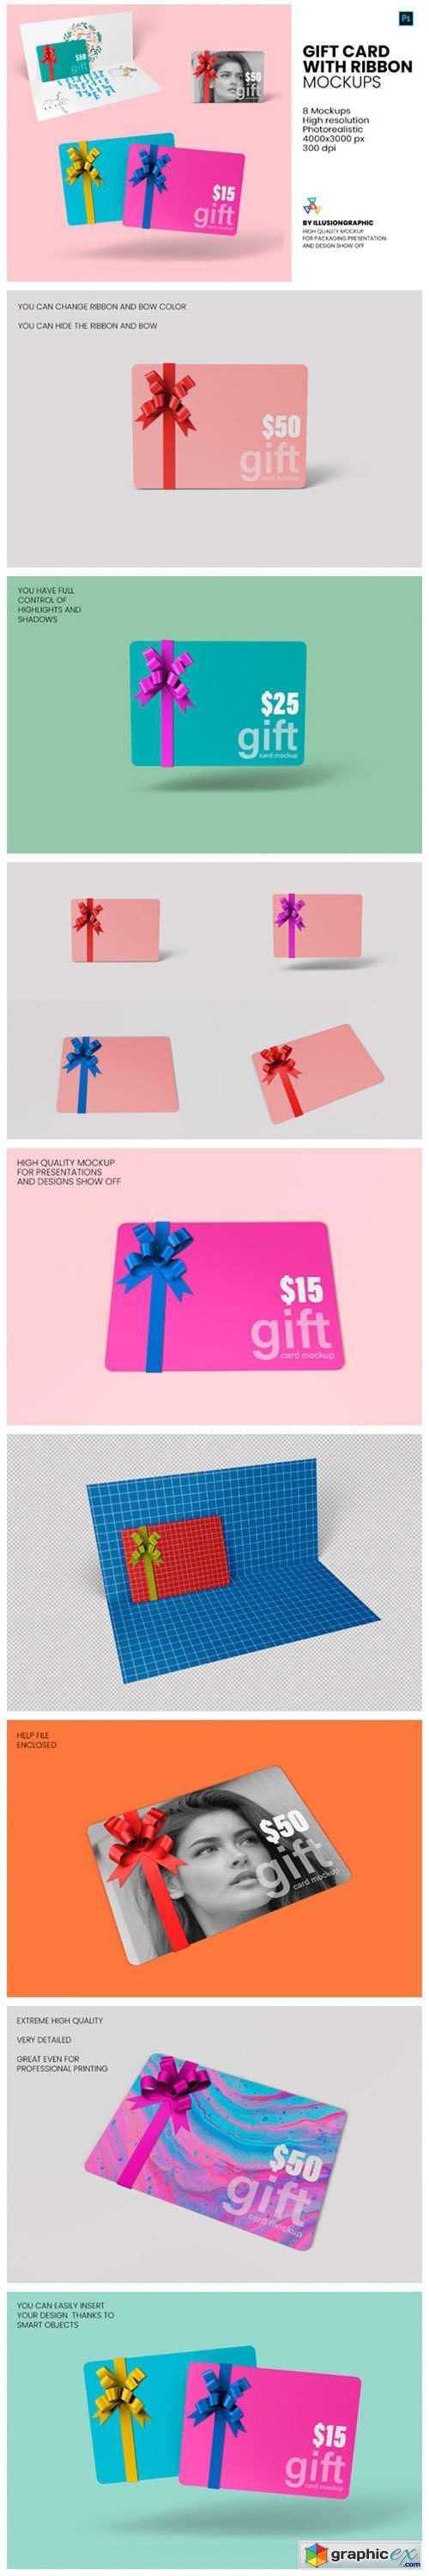 Download Gift Card With Ribbon Mockup 8 Views Free Download Vector Stock Image Photoshop Icon